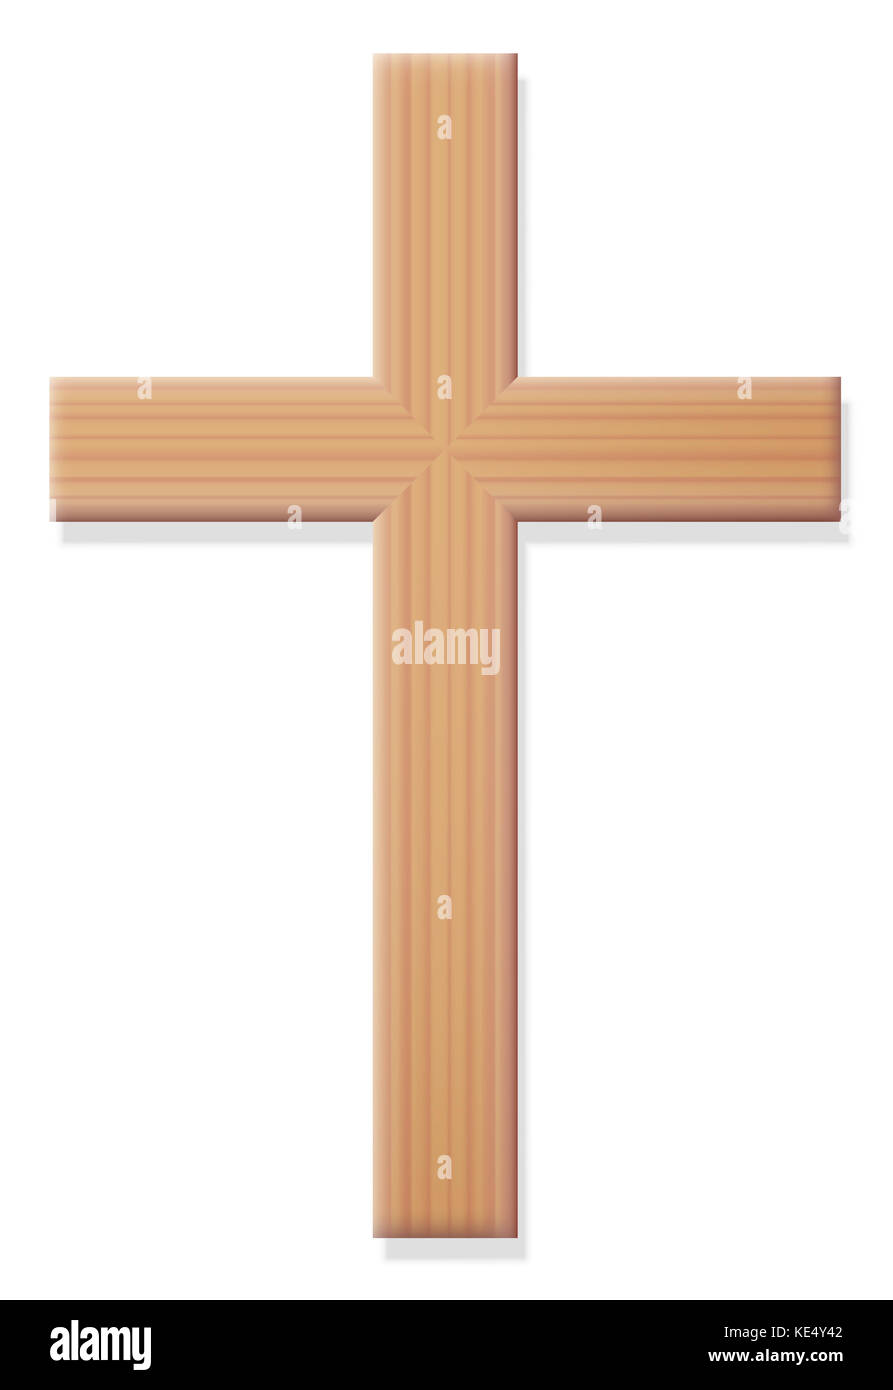 Wooden Christian cross, religious symbol of Christianity - ordinary, simple, rustic style, front view. Stock Photo